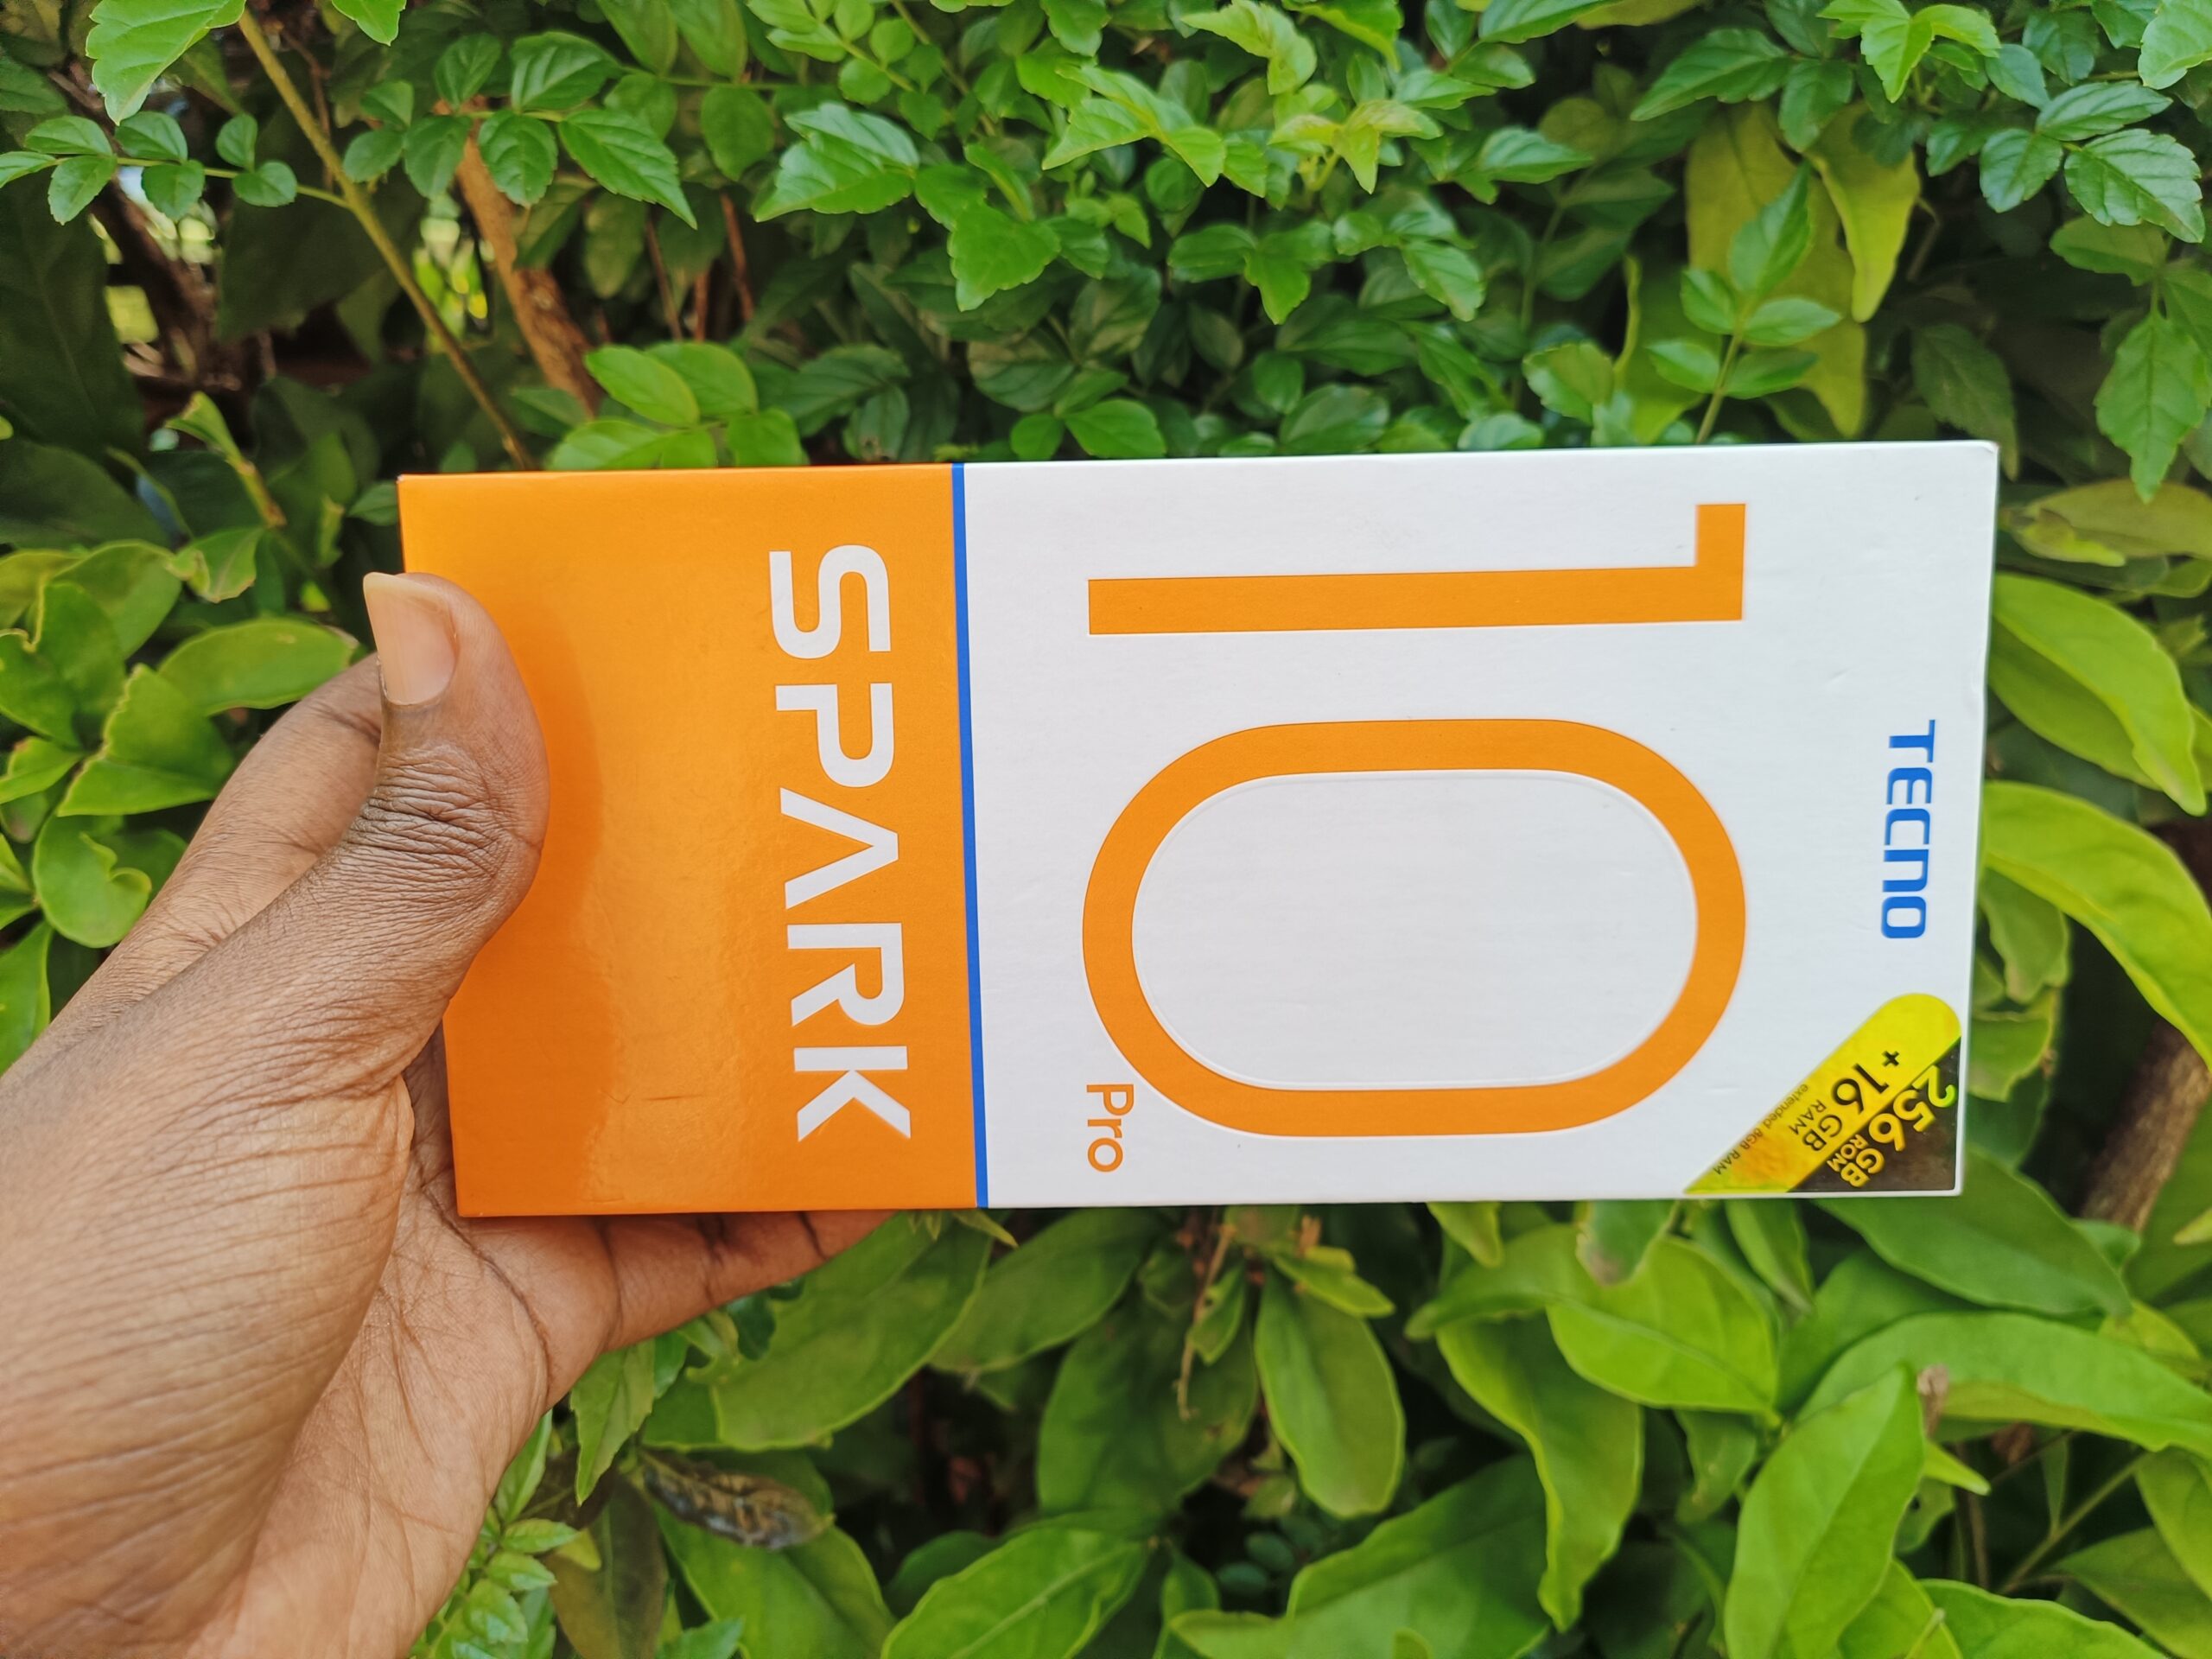 TECNO Spark 10 Pro Hands on Review: Great Design and Performance